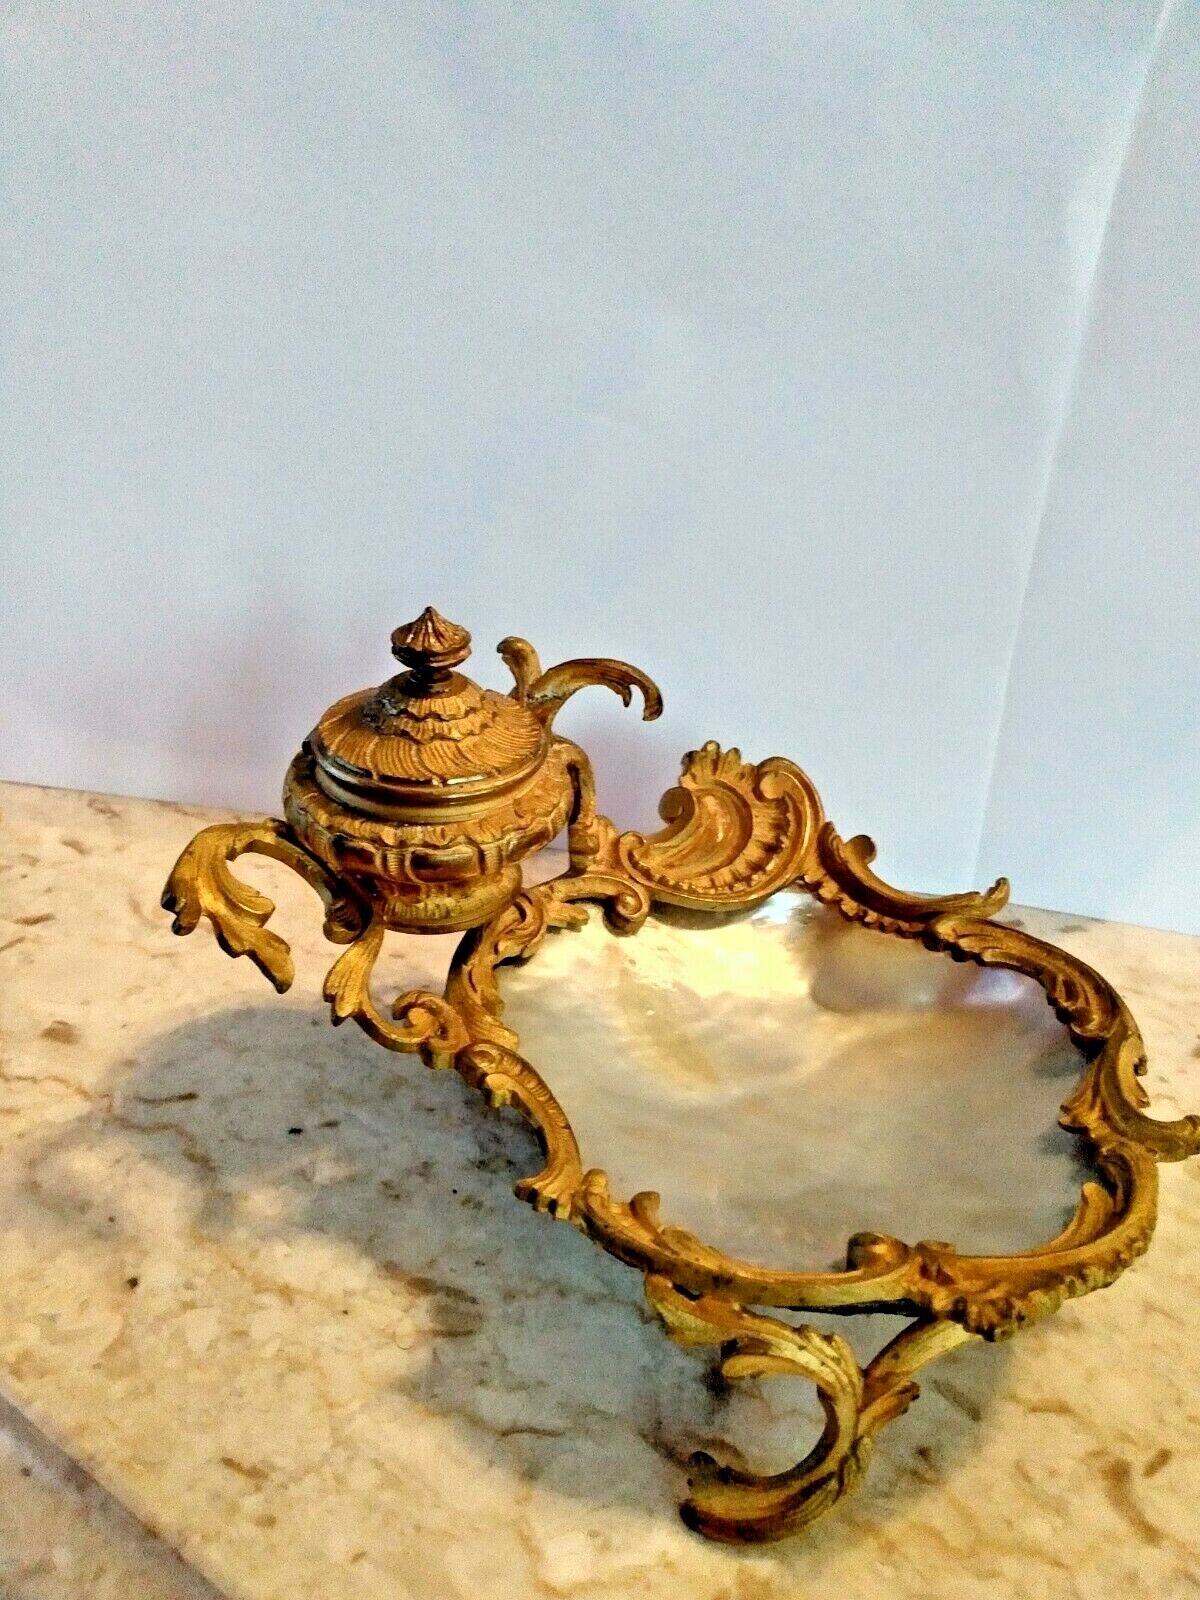 EXQUISITE ANTIQUE FRENCH DORE BRONZE BAROQUE DESIGN INKWELL WITH SHELL HOLDER